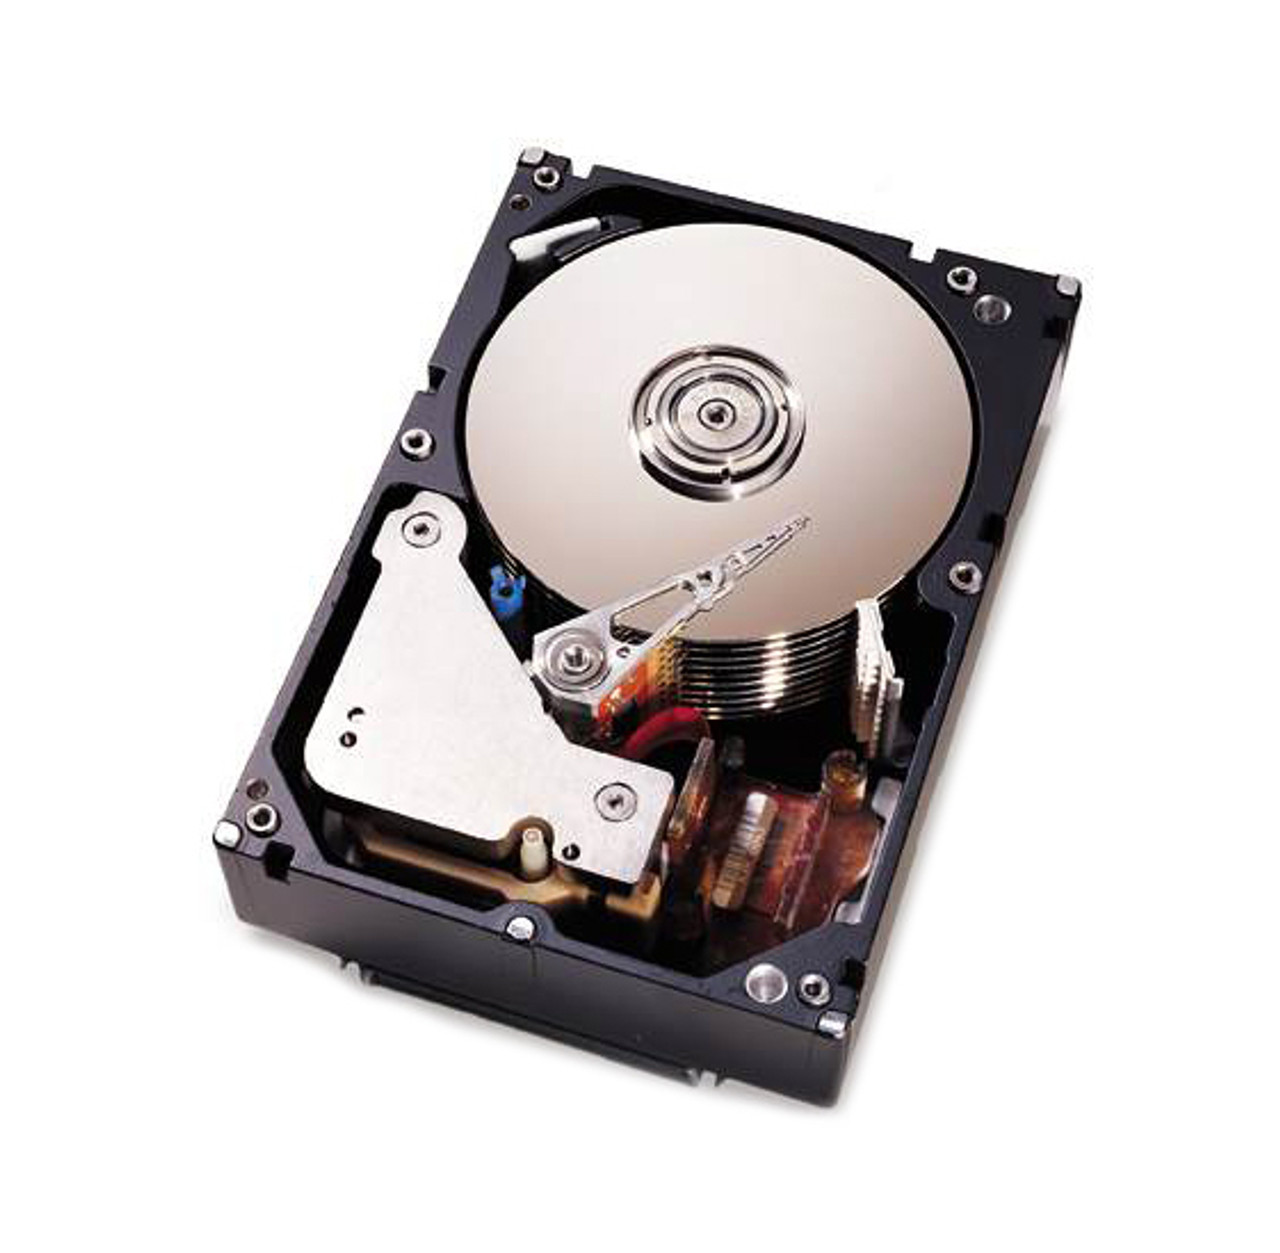 02R700-2 Dell 73GB 10000RPM Ultra-320 SCSI 80-Pin Hot Swap 8MB Cache 3.5-inch Internal Hard Drive with Tray